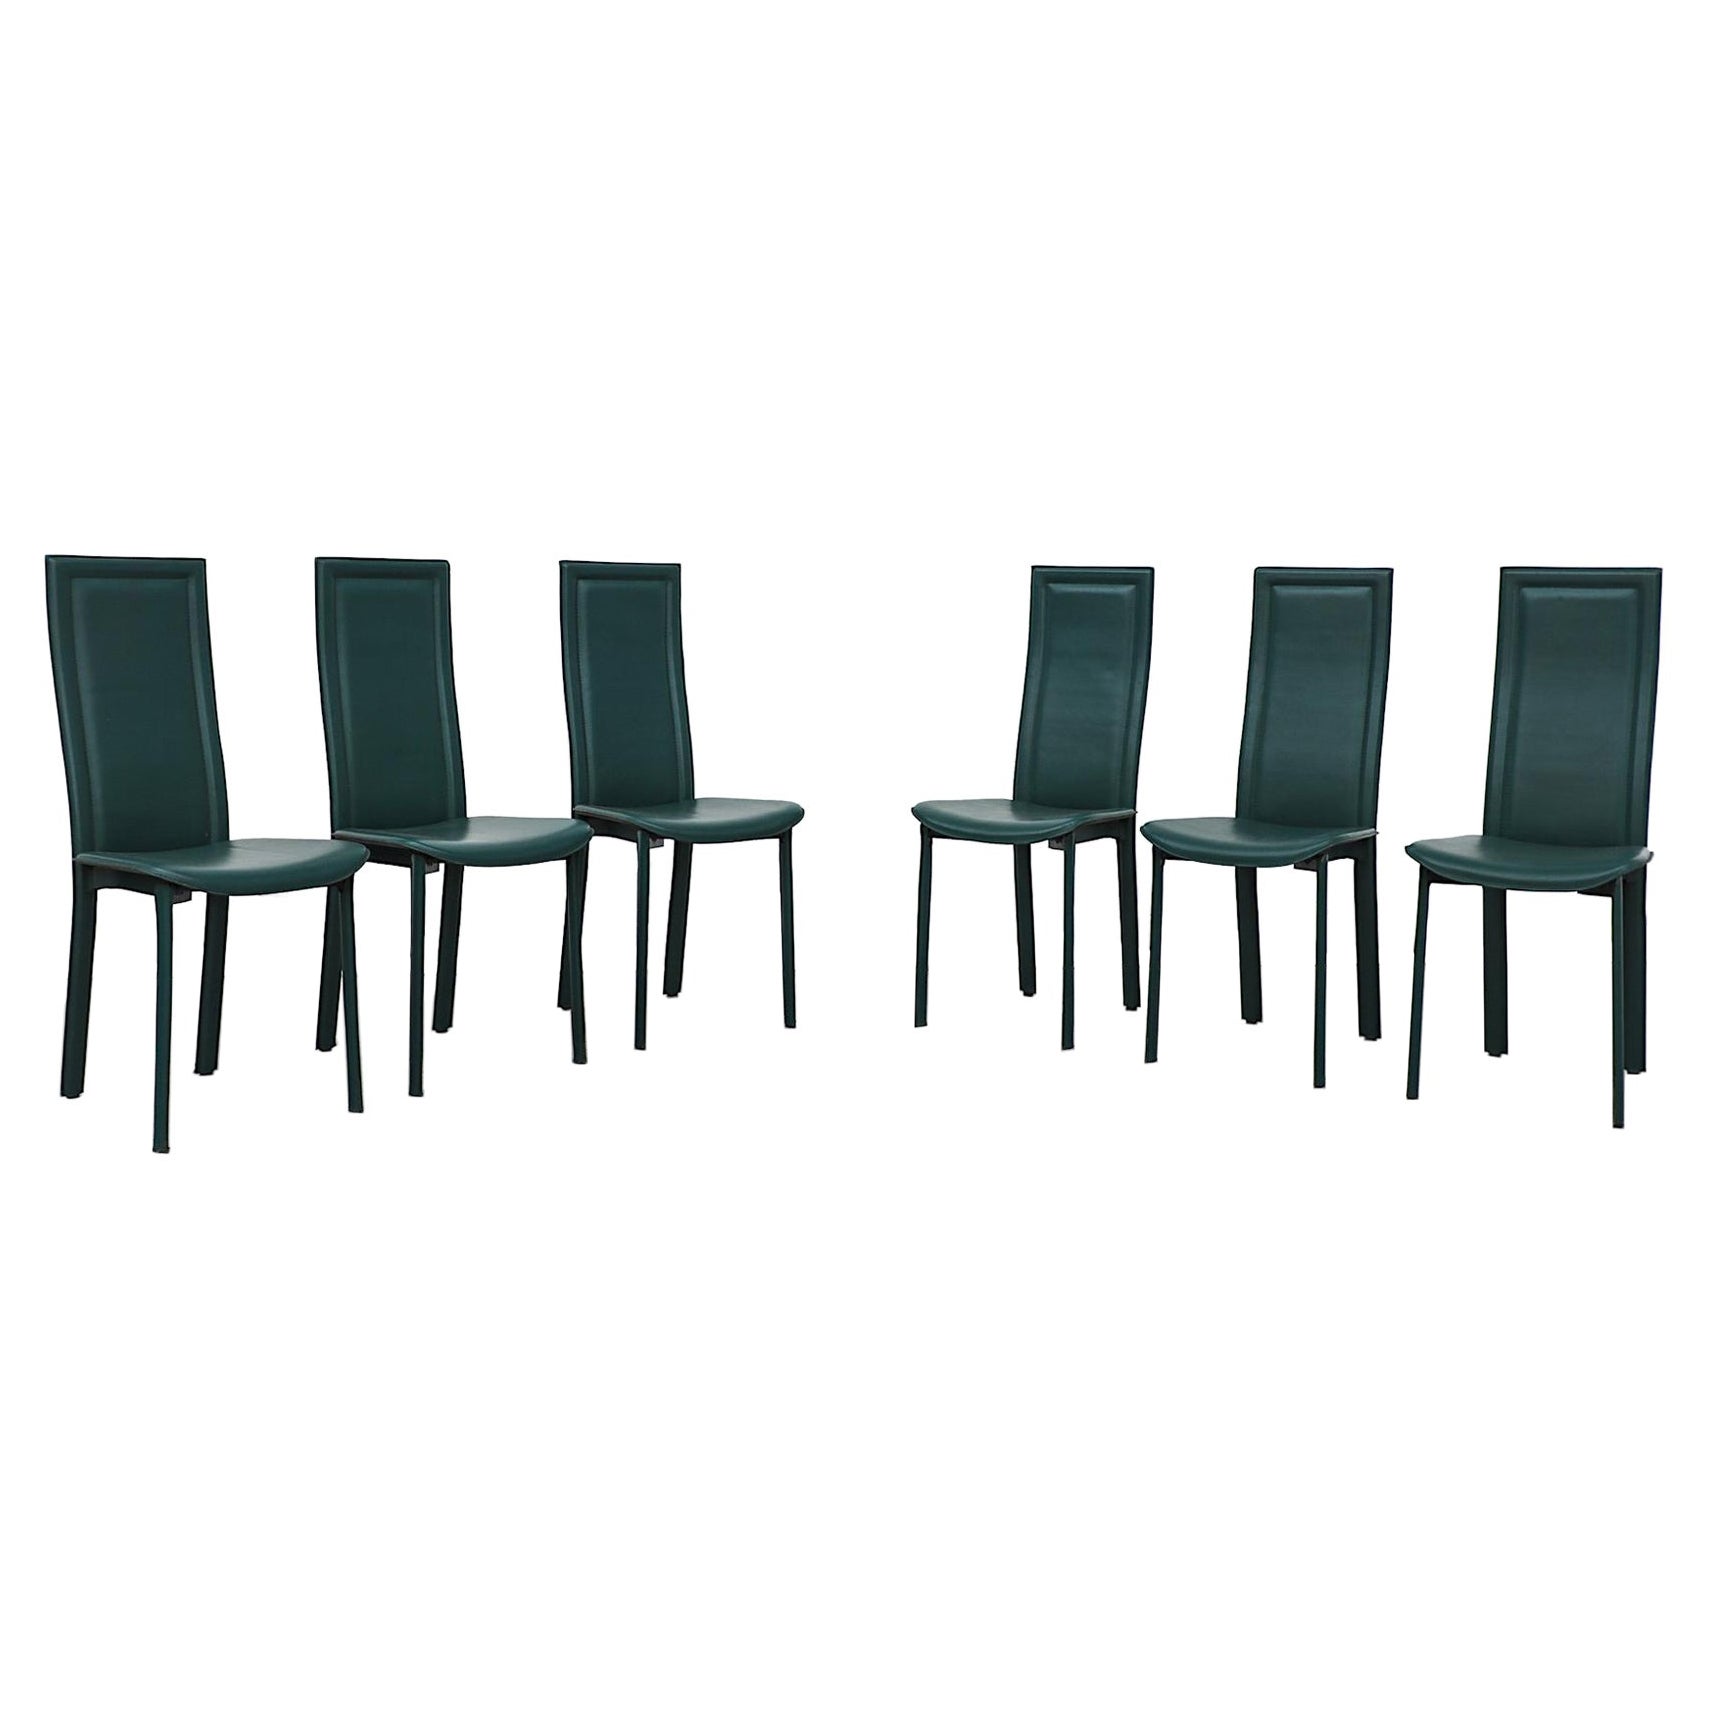 Set of 6 Handsome Green Leather Cattelan Italia High Back Dining Chairs